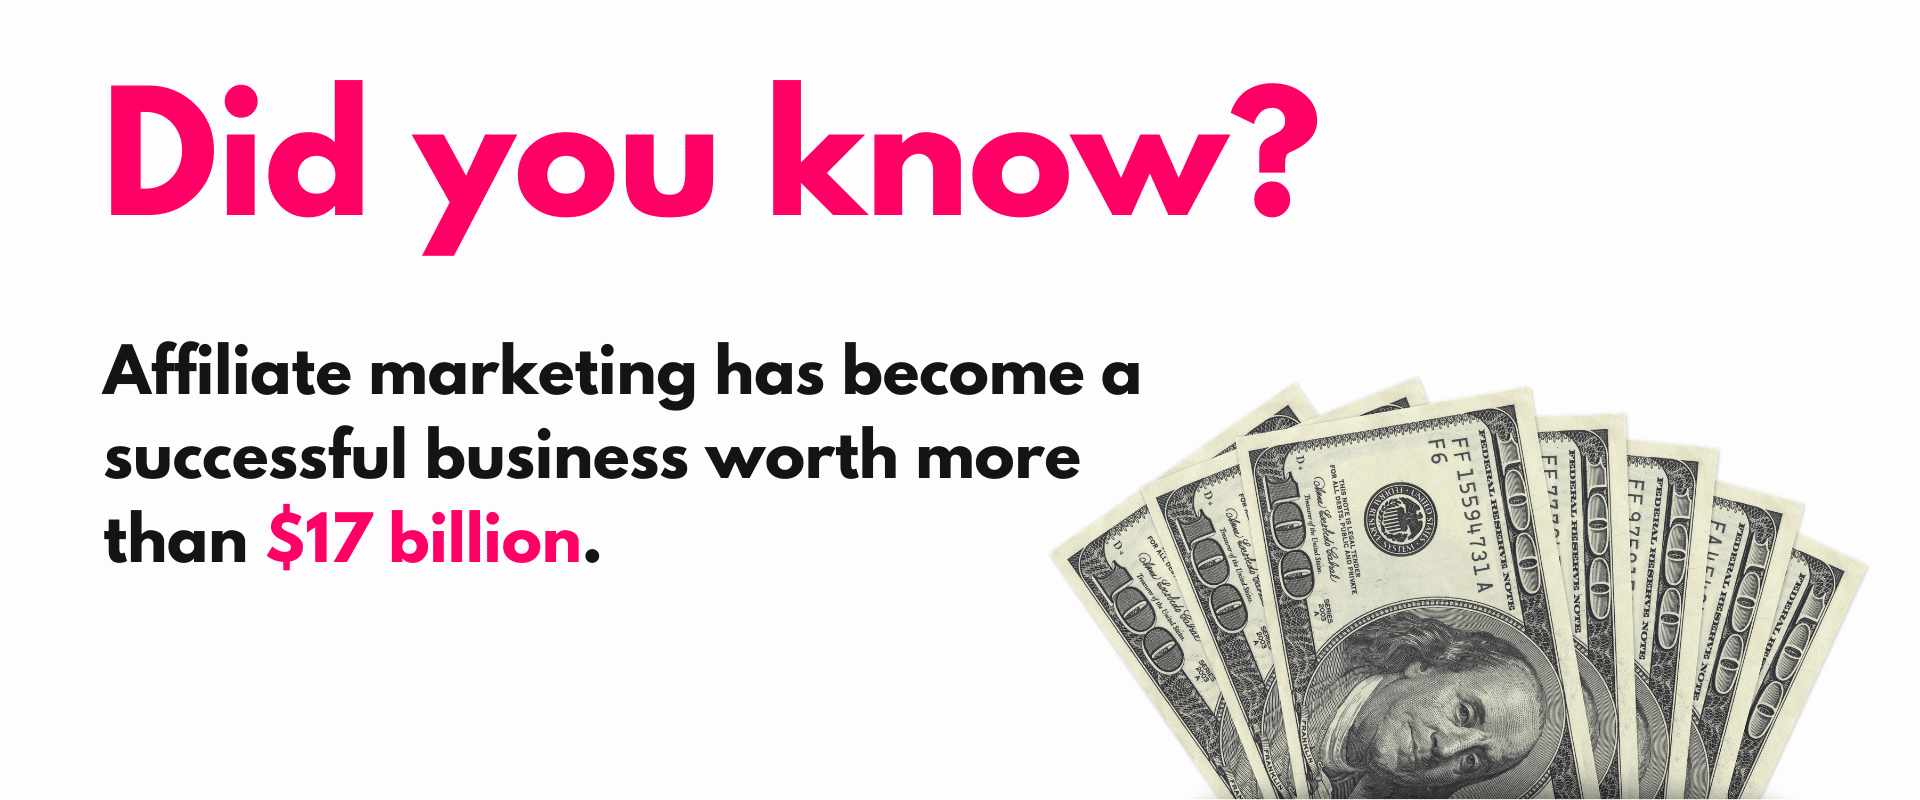 Did you know? affiliate marketing has become a successful business worth more than $.